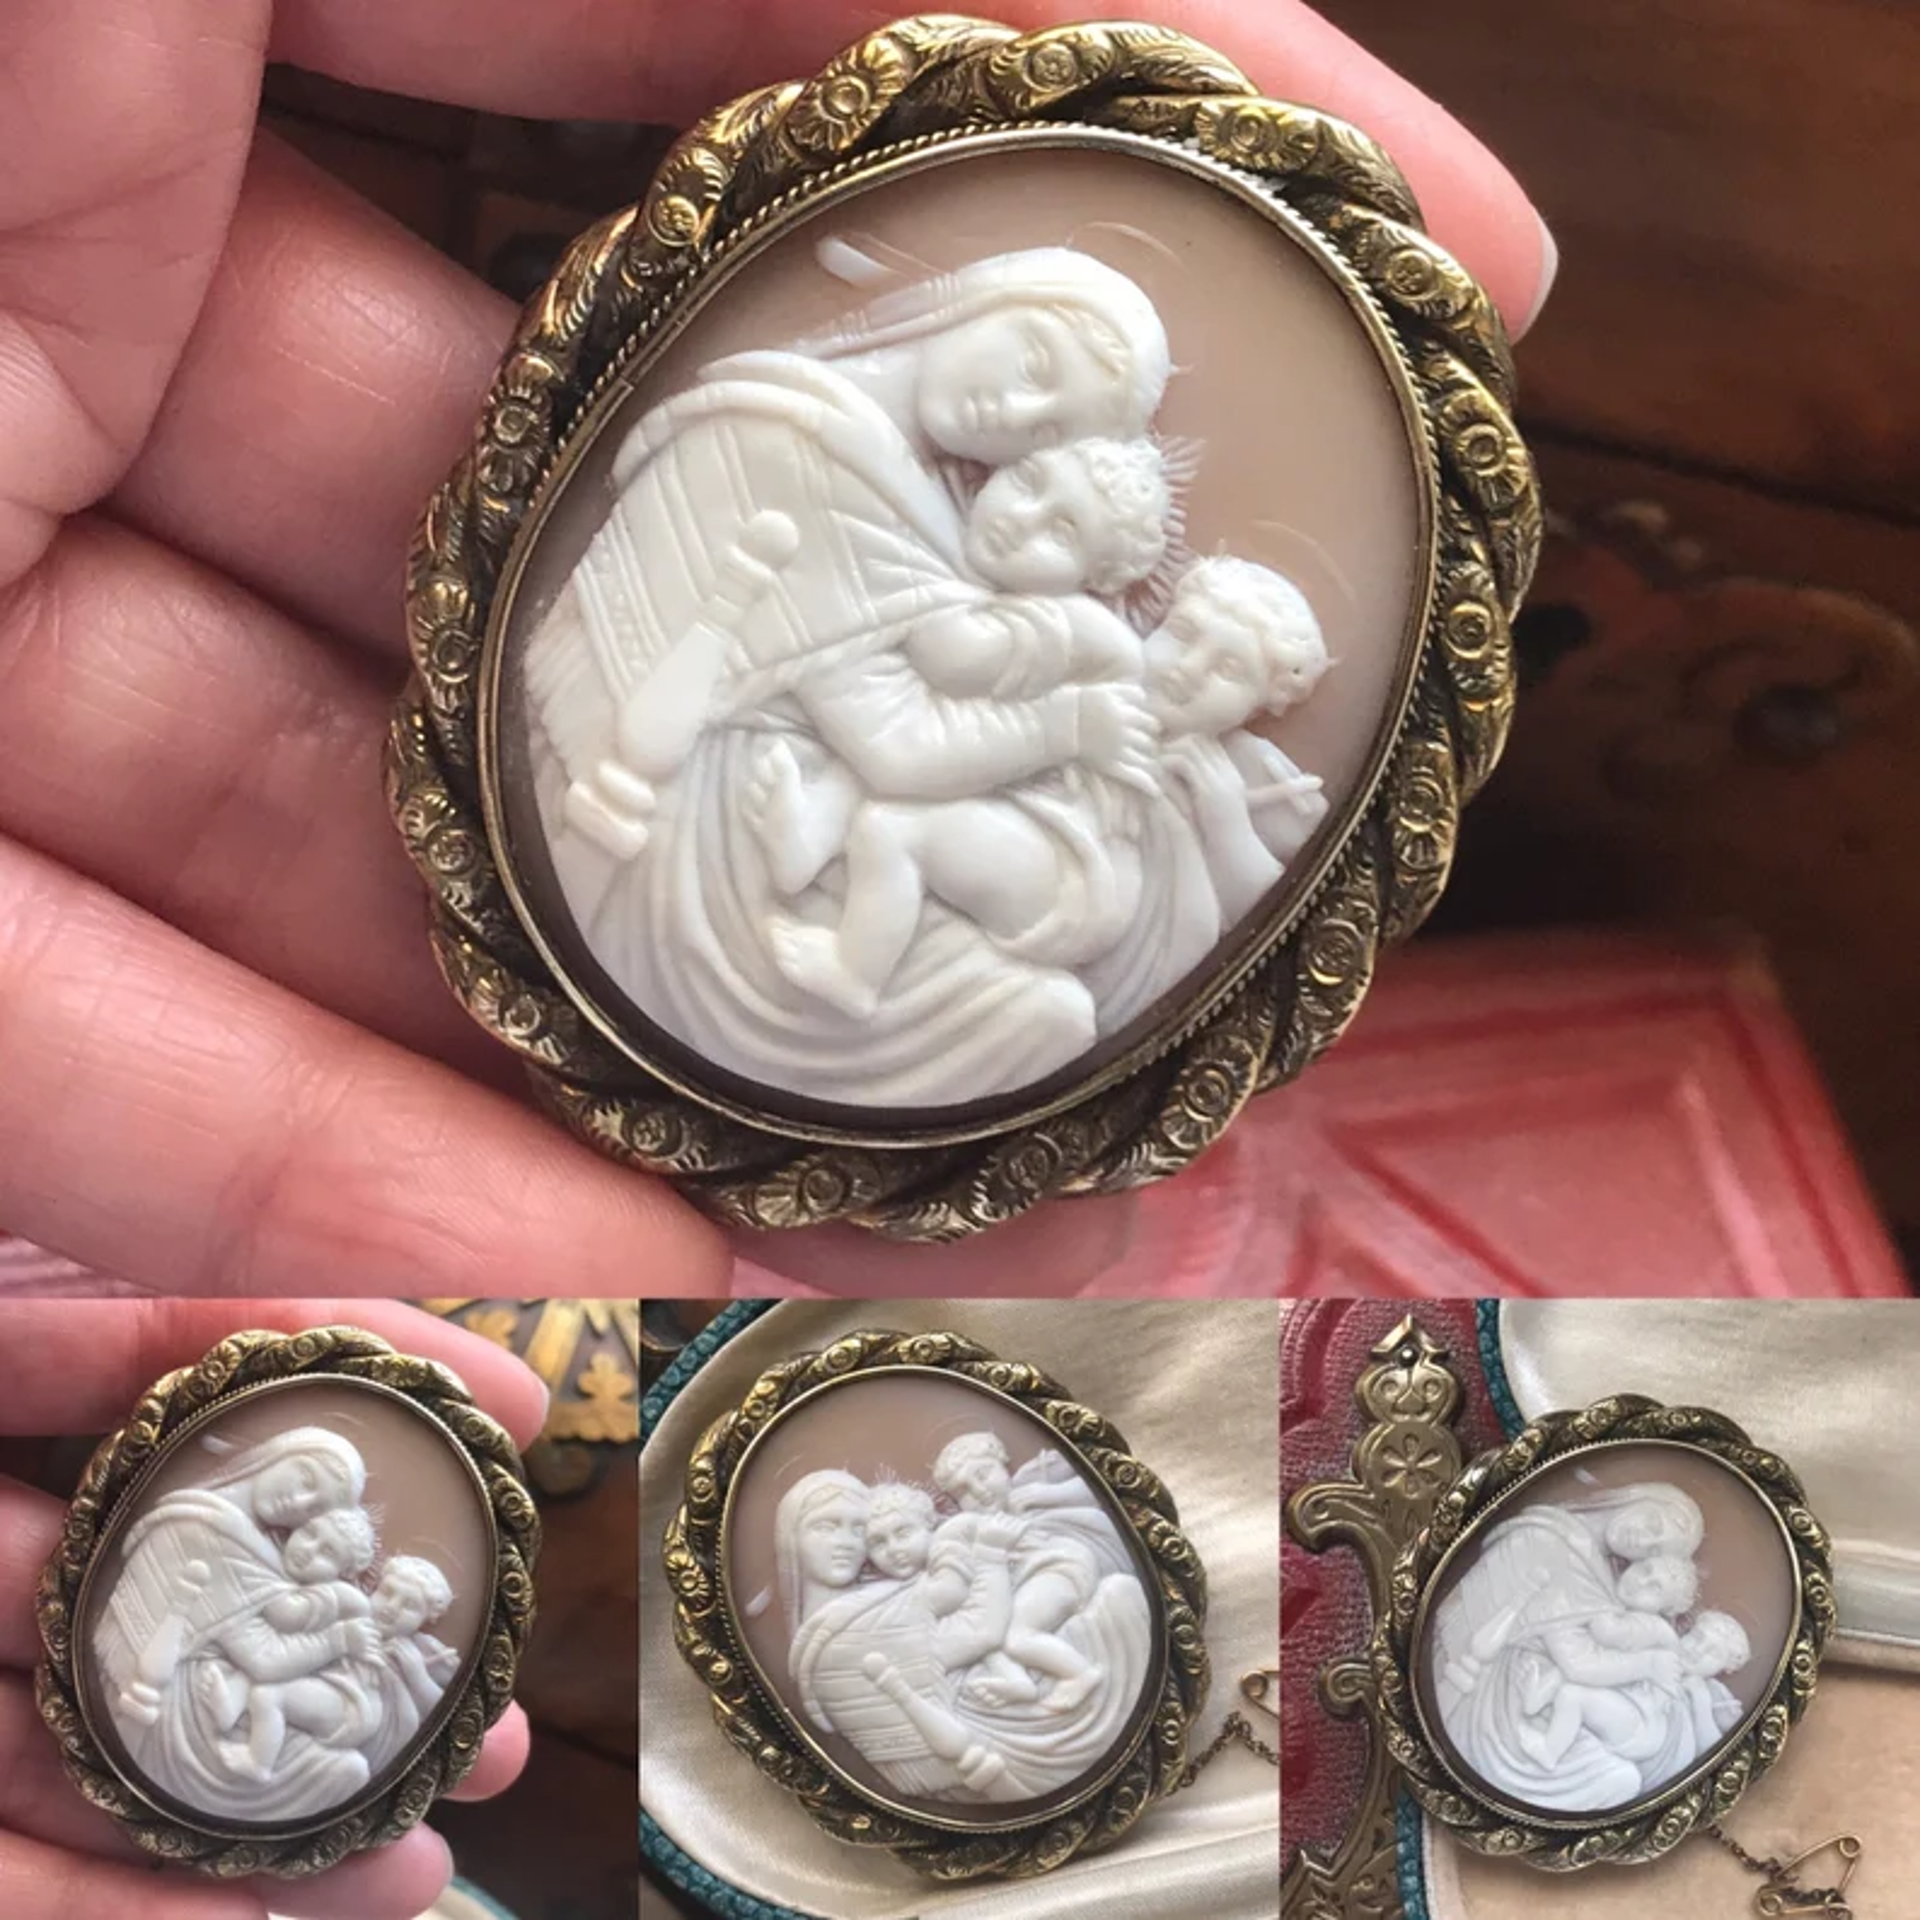 Victorian/Edwardian Italian religious Madonna with child, carved shell cameo brooch/pin by Cameo